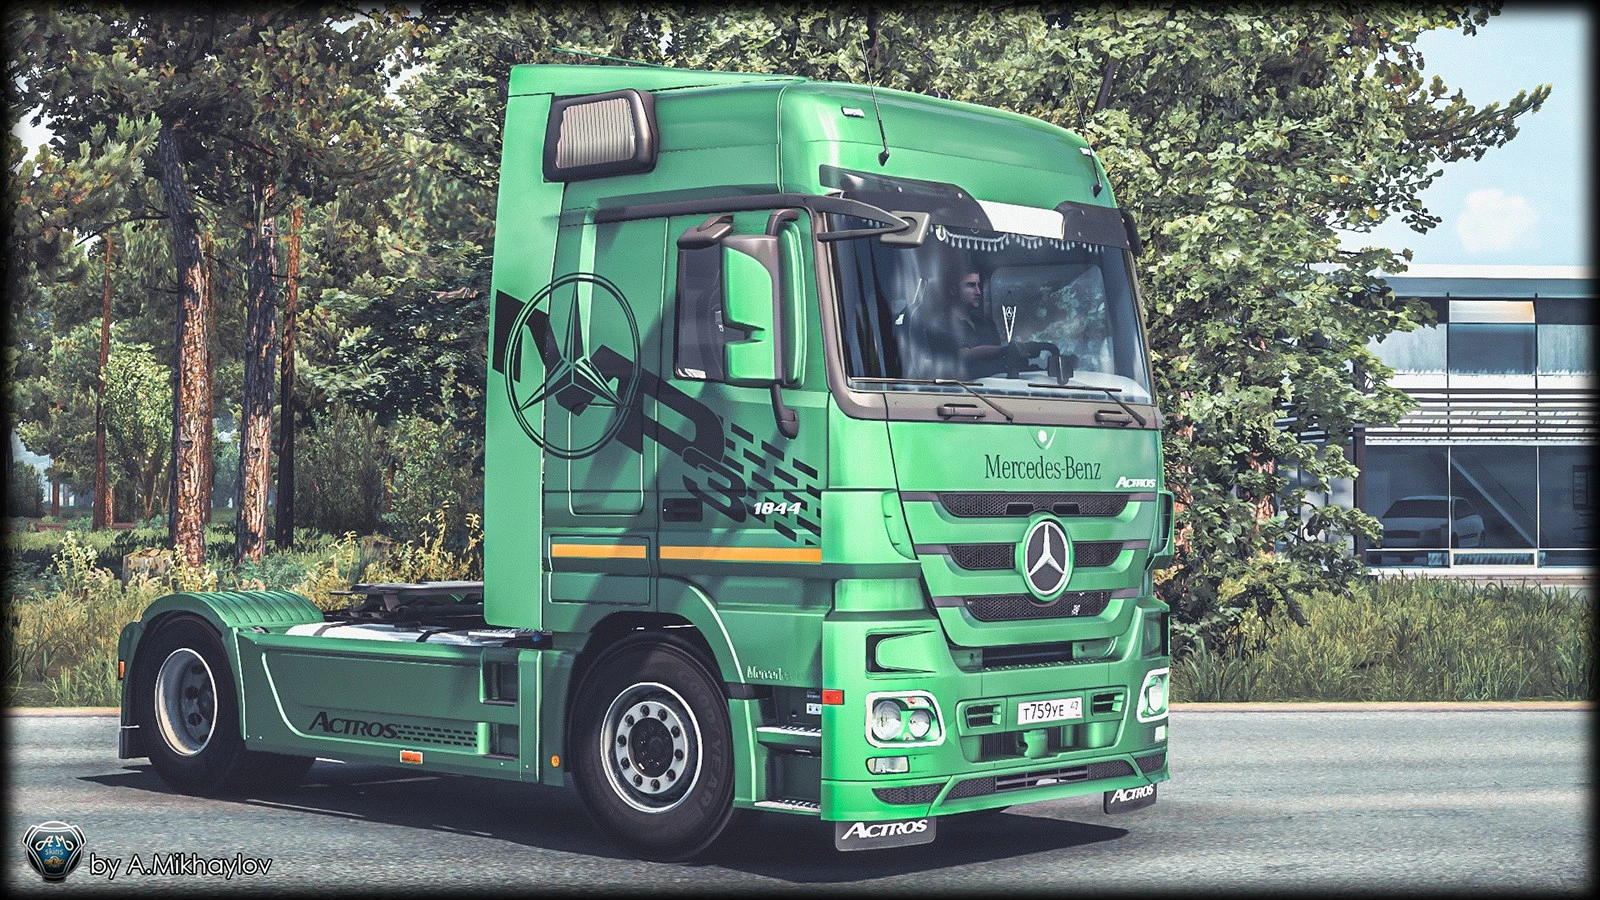 Mercedes mp. Mercedes Benz Actros mp2. Мерседес Актрос мп1 Мегаспейс. Mercedes Benz Actros mp4. Mercedes-Benz Actros mp1 Mega Space 1846.